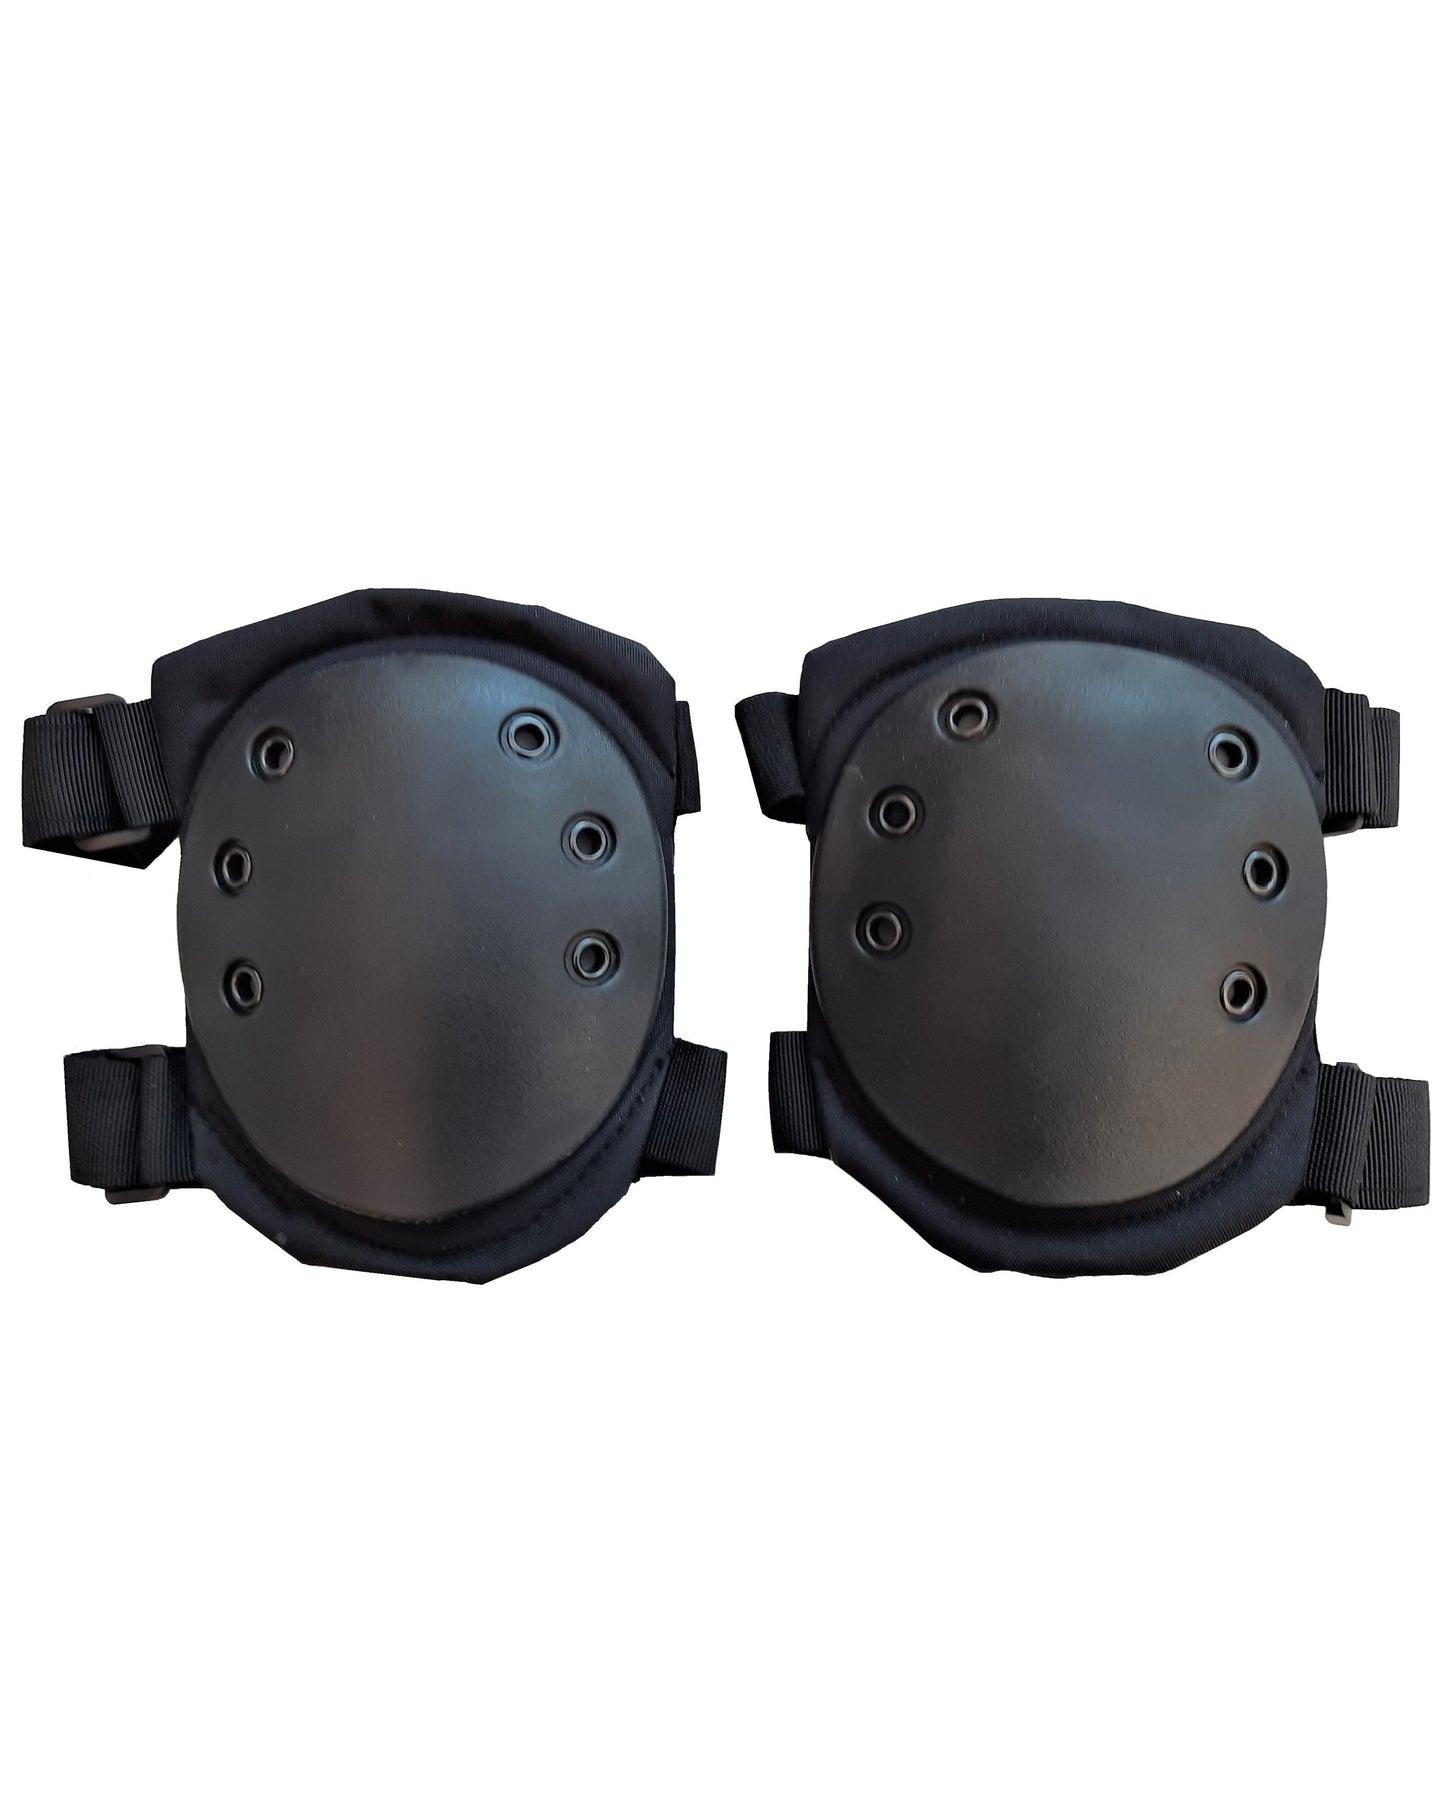 Knee pads military black tactical army defense classic